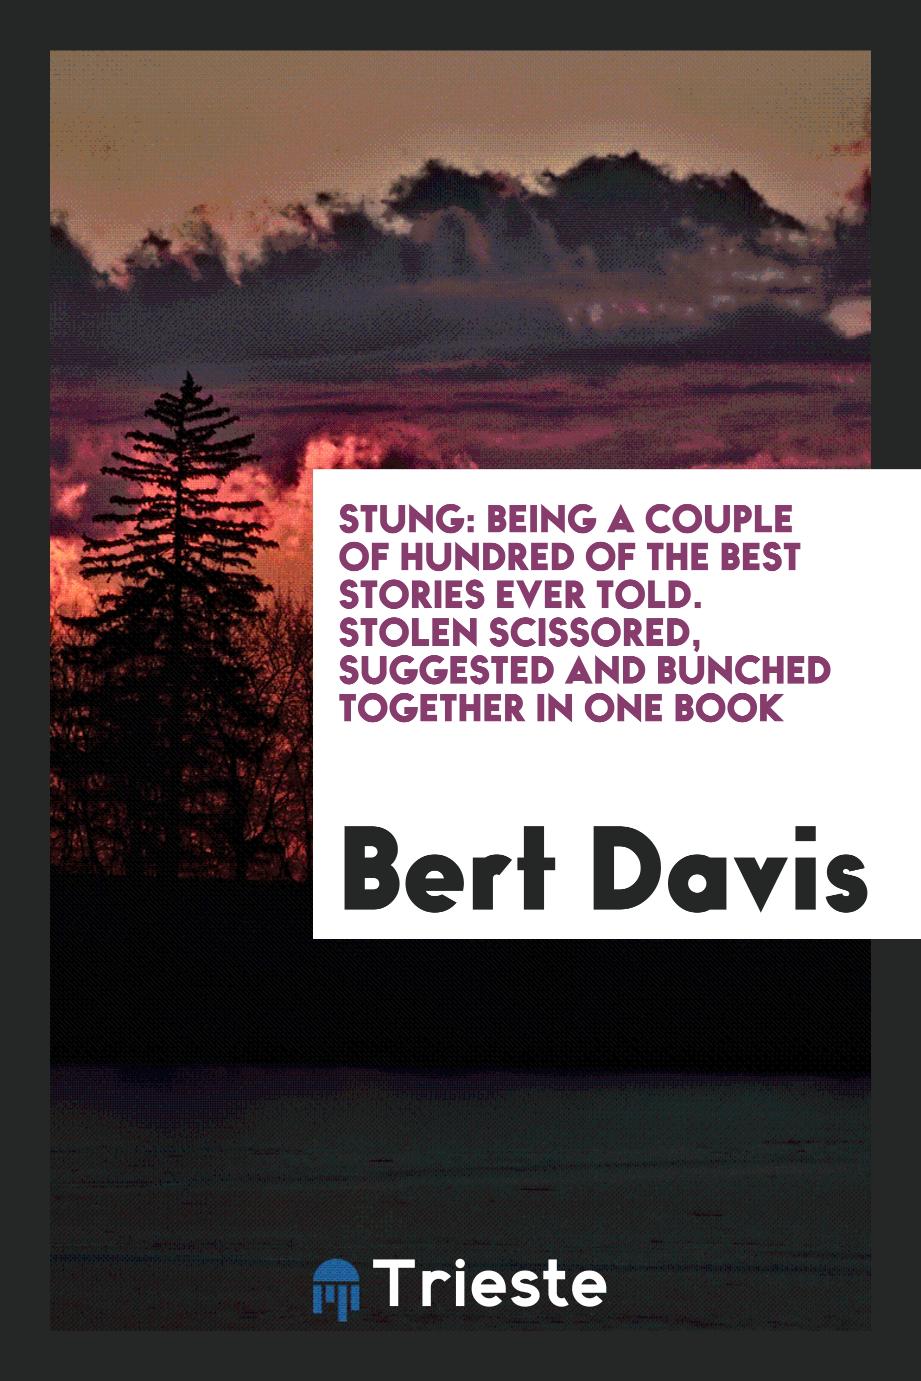 Stung: being a couple of hundred of the best stories ever told. Stolen scissored, suggested and bunched together in one book